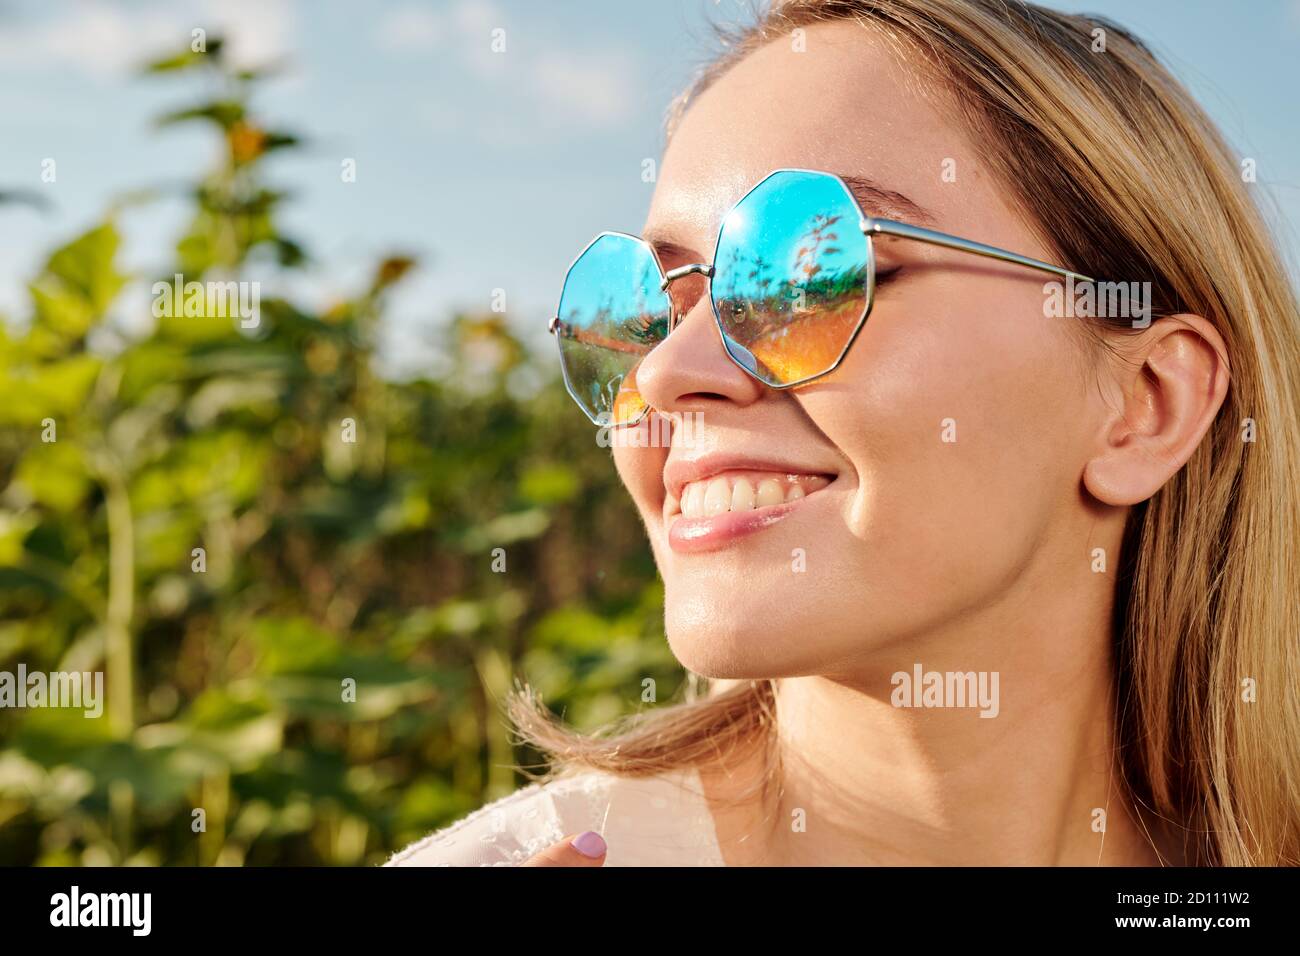 Face of smiling young blond woman in sunglasses standing against sunflowers Stock Photo